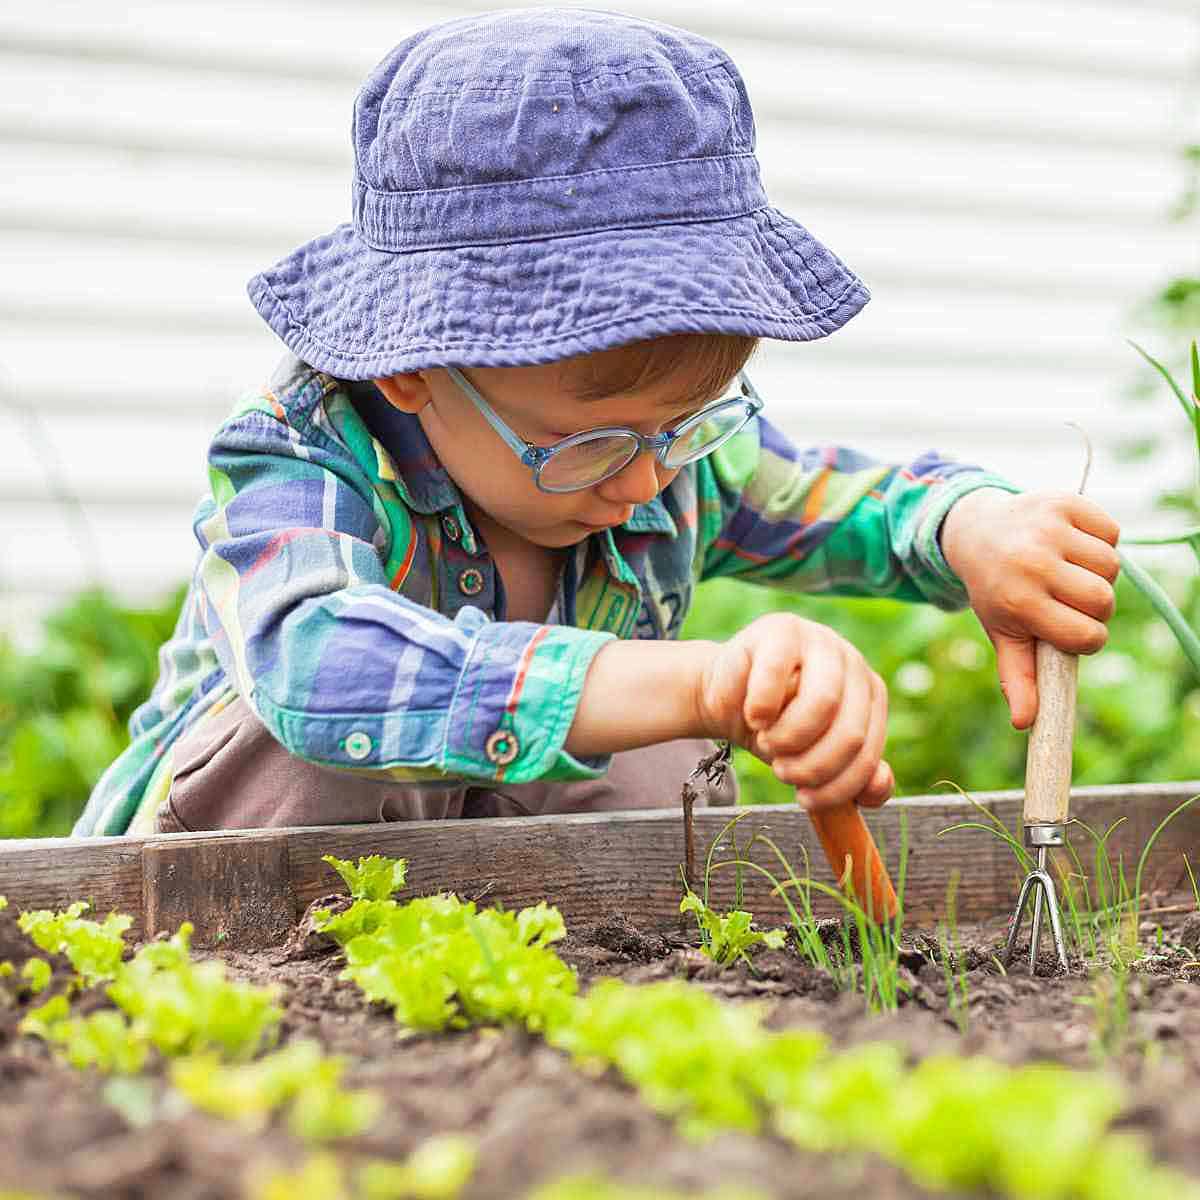 A young boy in a blue hat digging in a garden.